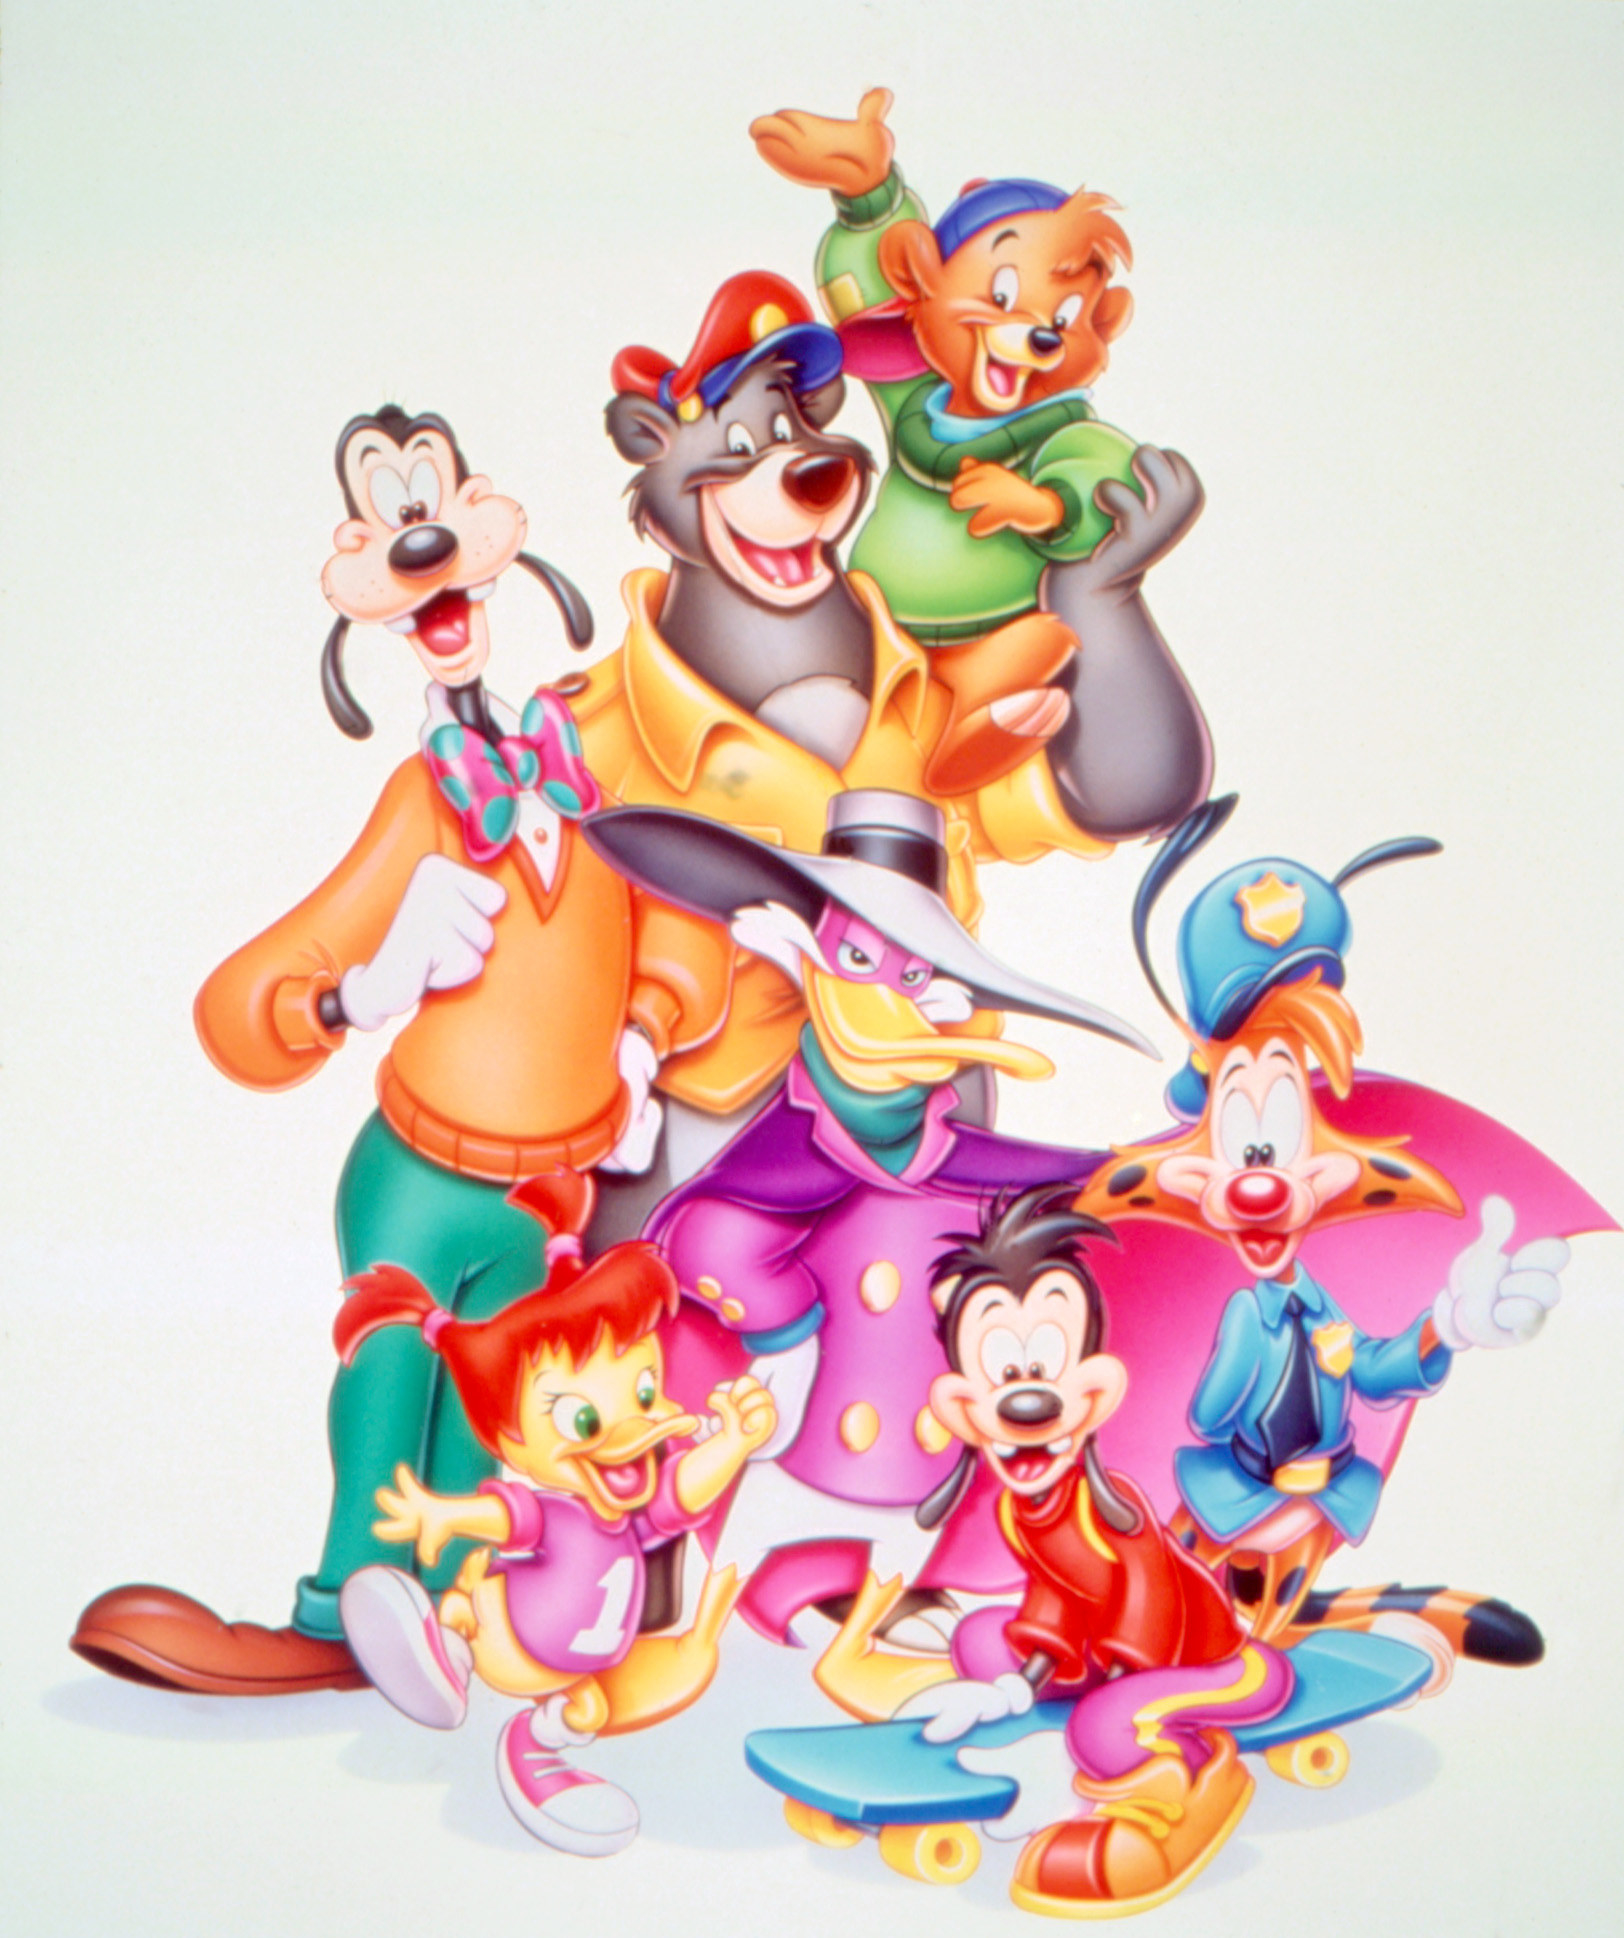 A photo of cartoon characters from the Disney Afternoon